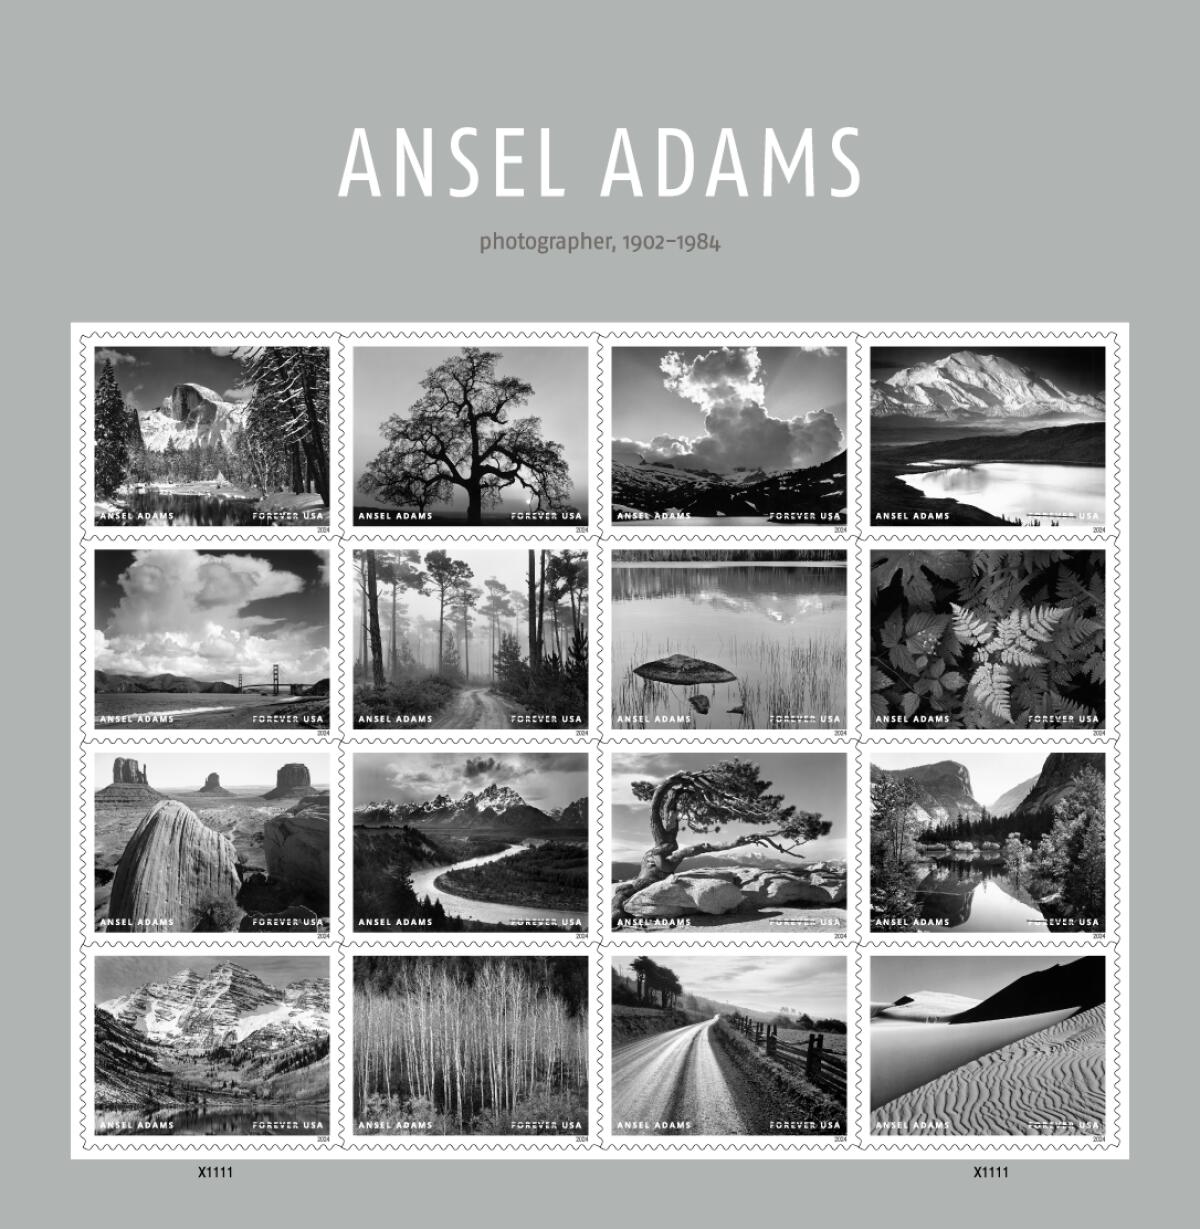 The U.S. Postal Service will be issuing a new set of stamps celebrating the photography of Ansel Adams.